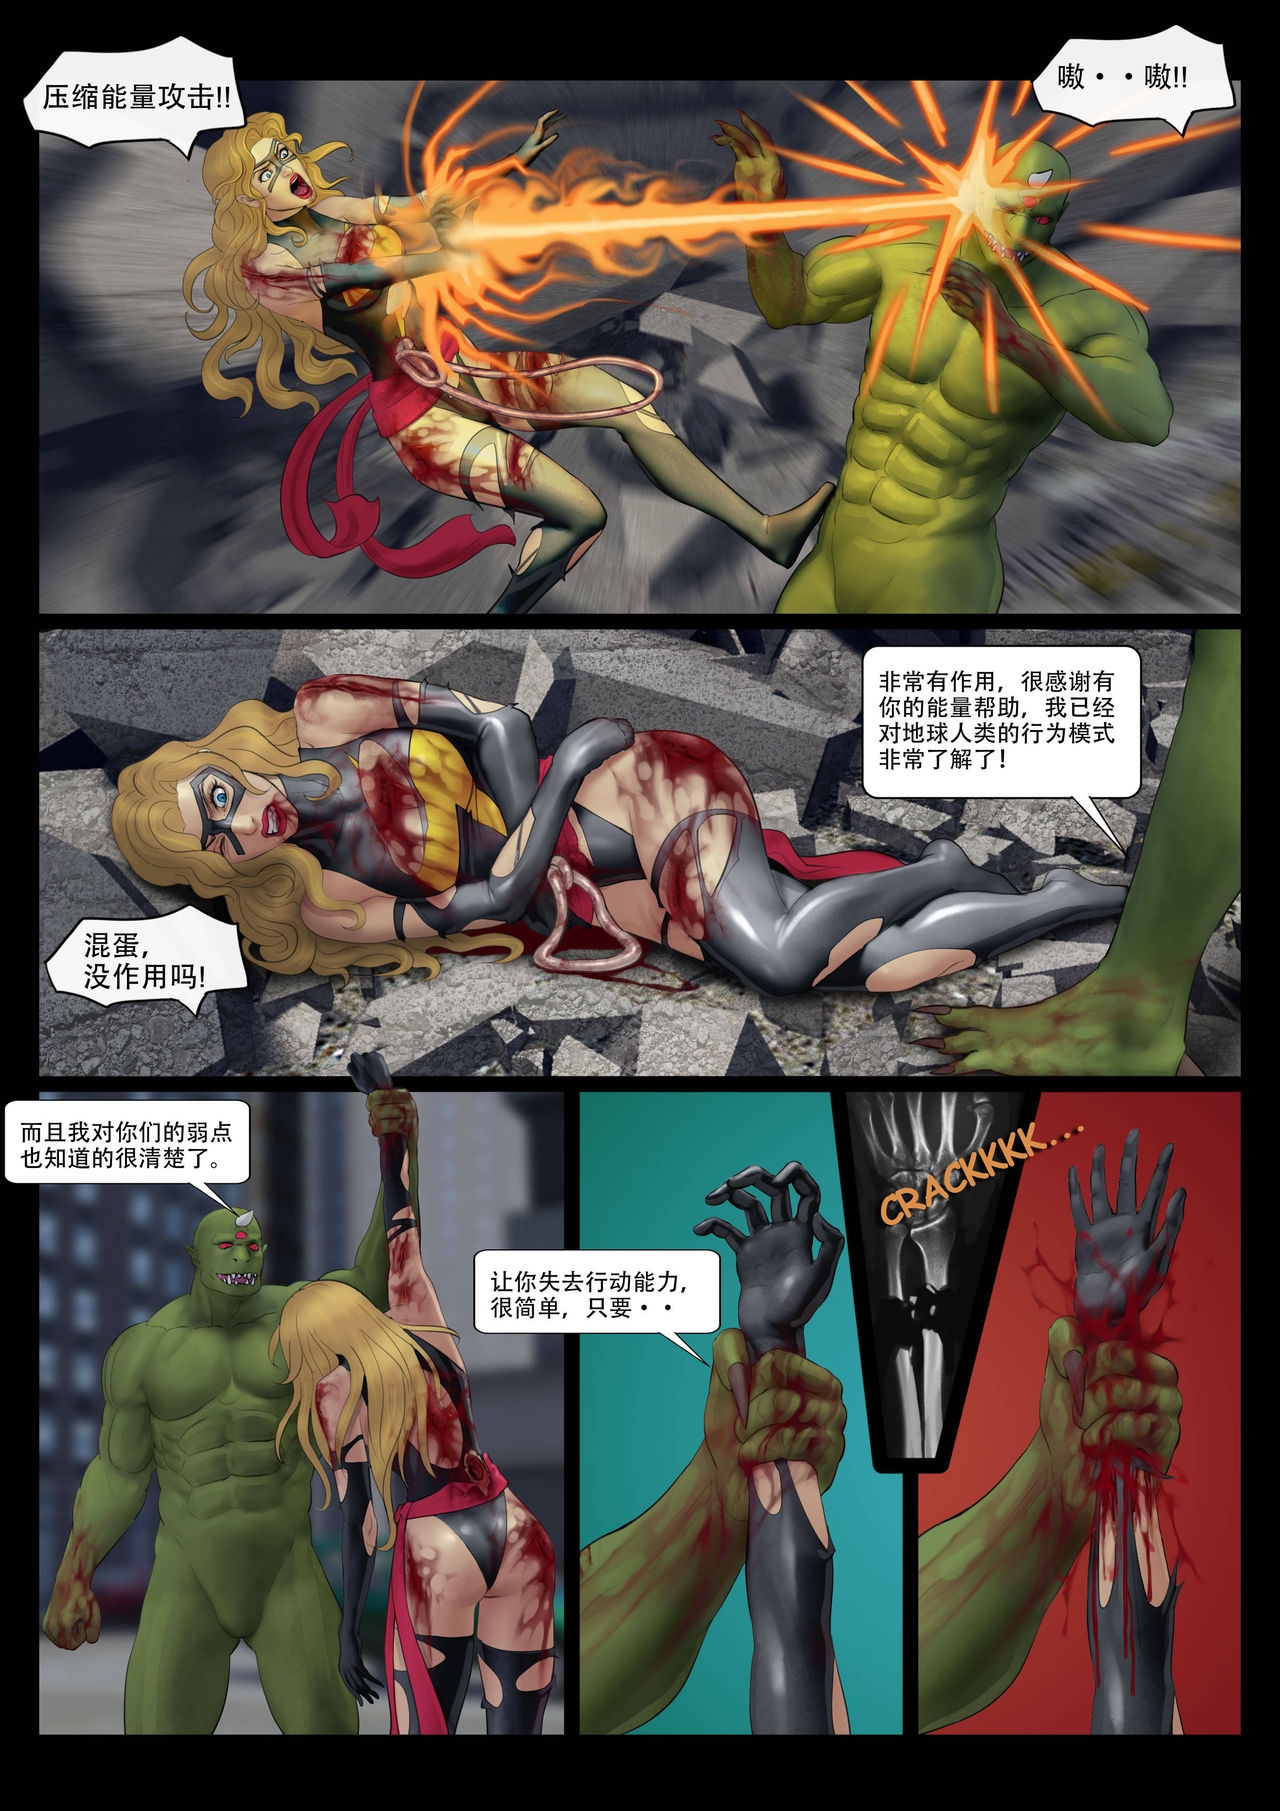 The Nightmare of Avengers Chapter 0 29